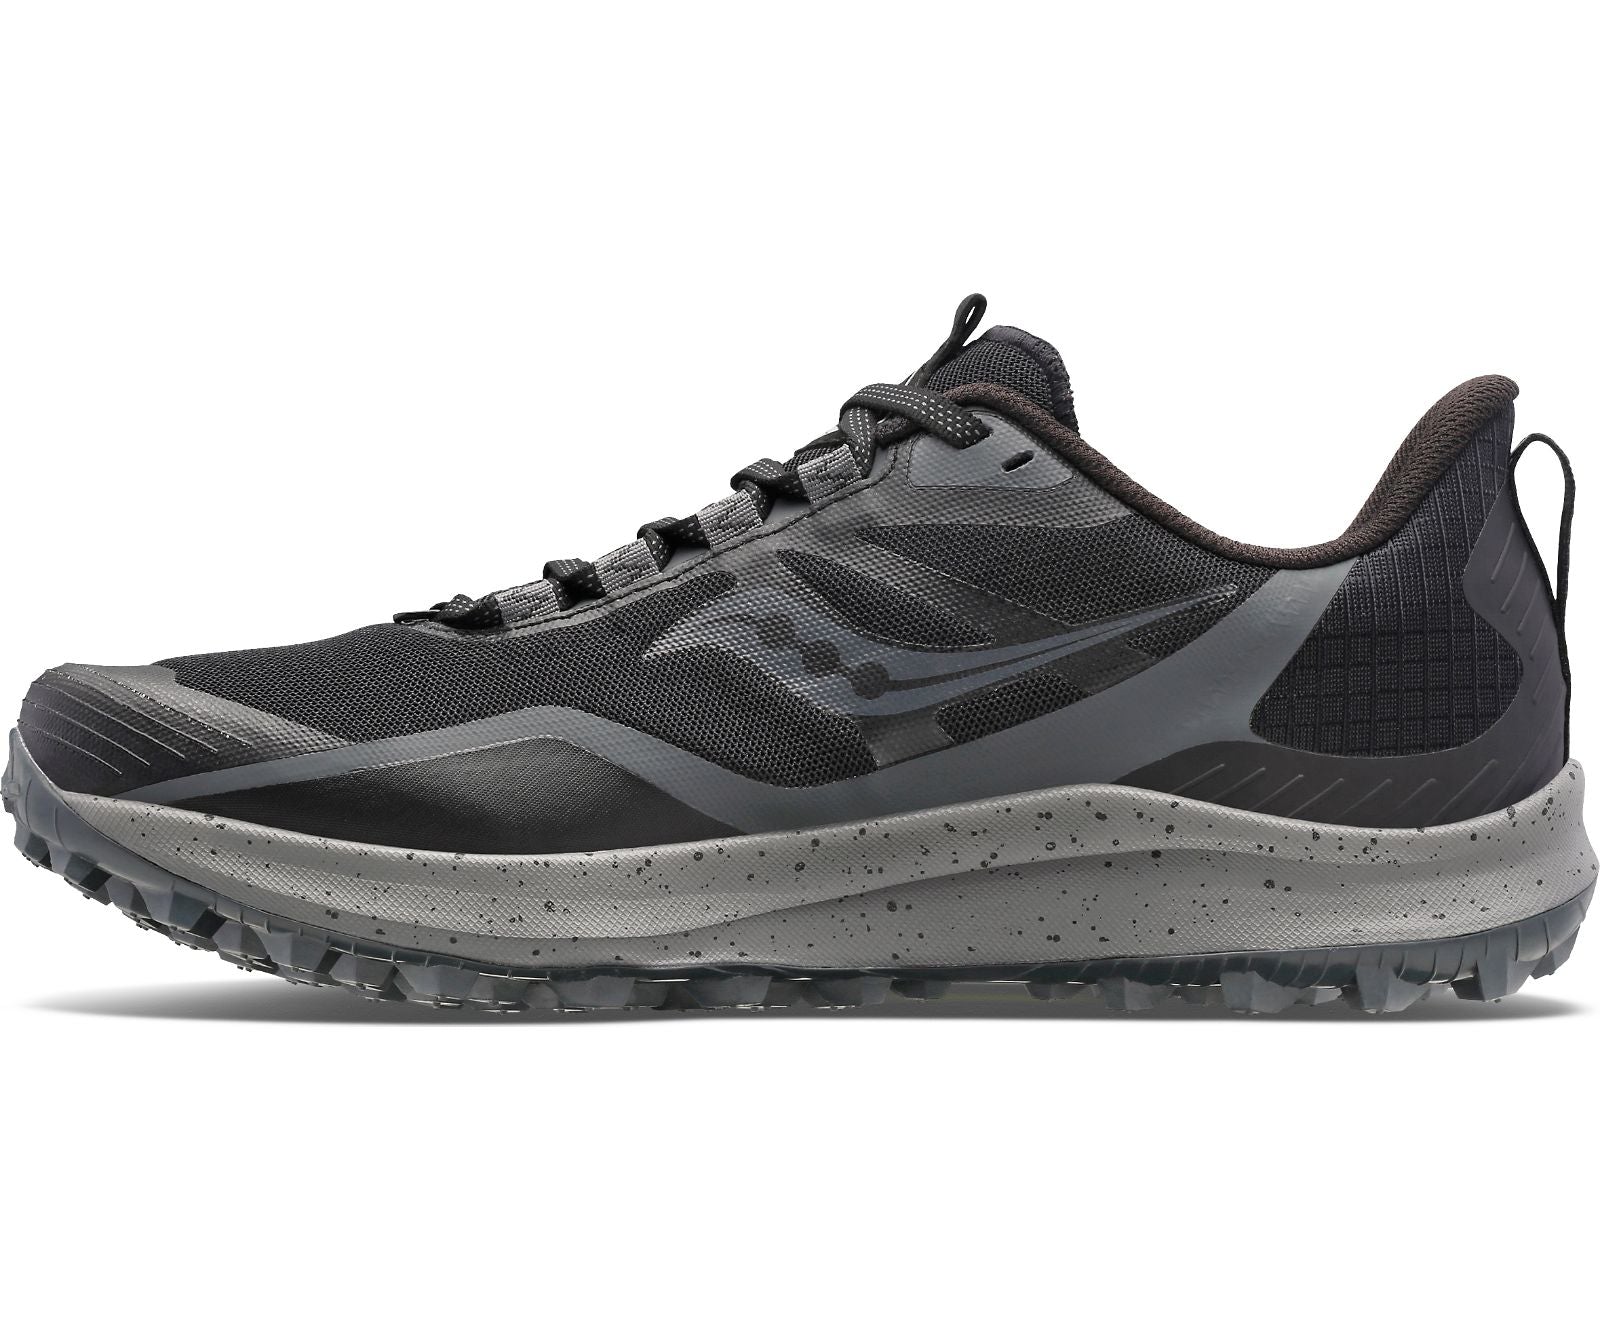 Medial view of the Women's Peregrine 12 Trail shoe by Saucony in Black/Charcoal